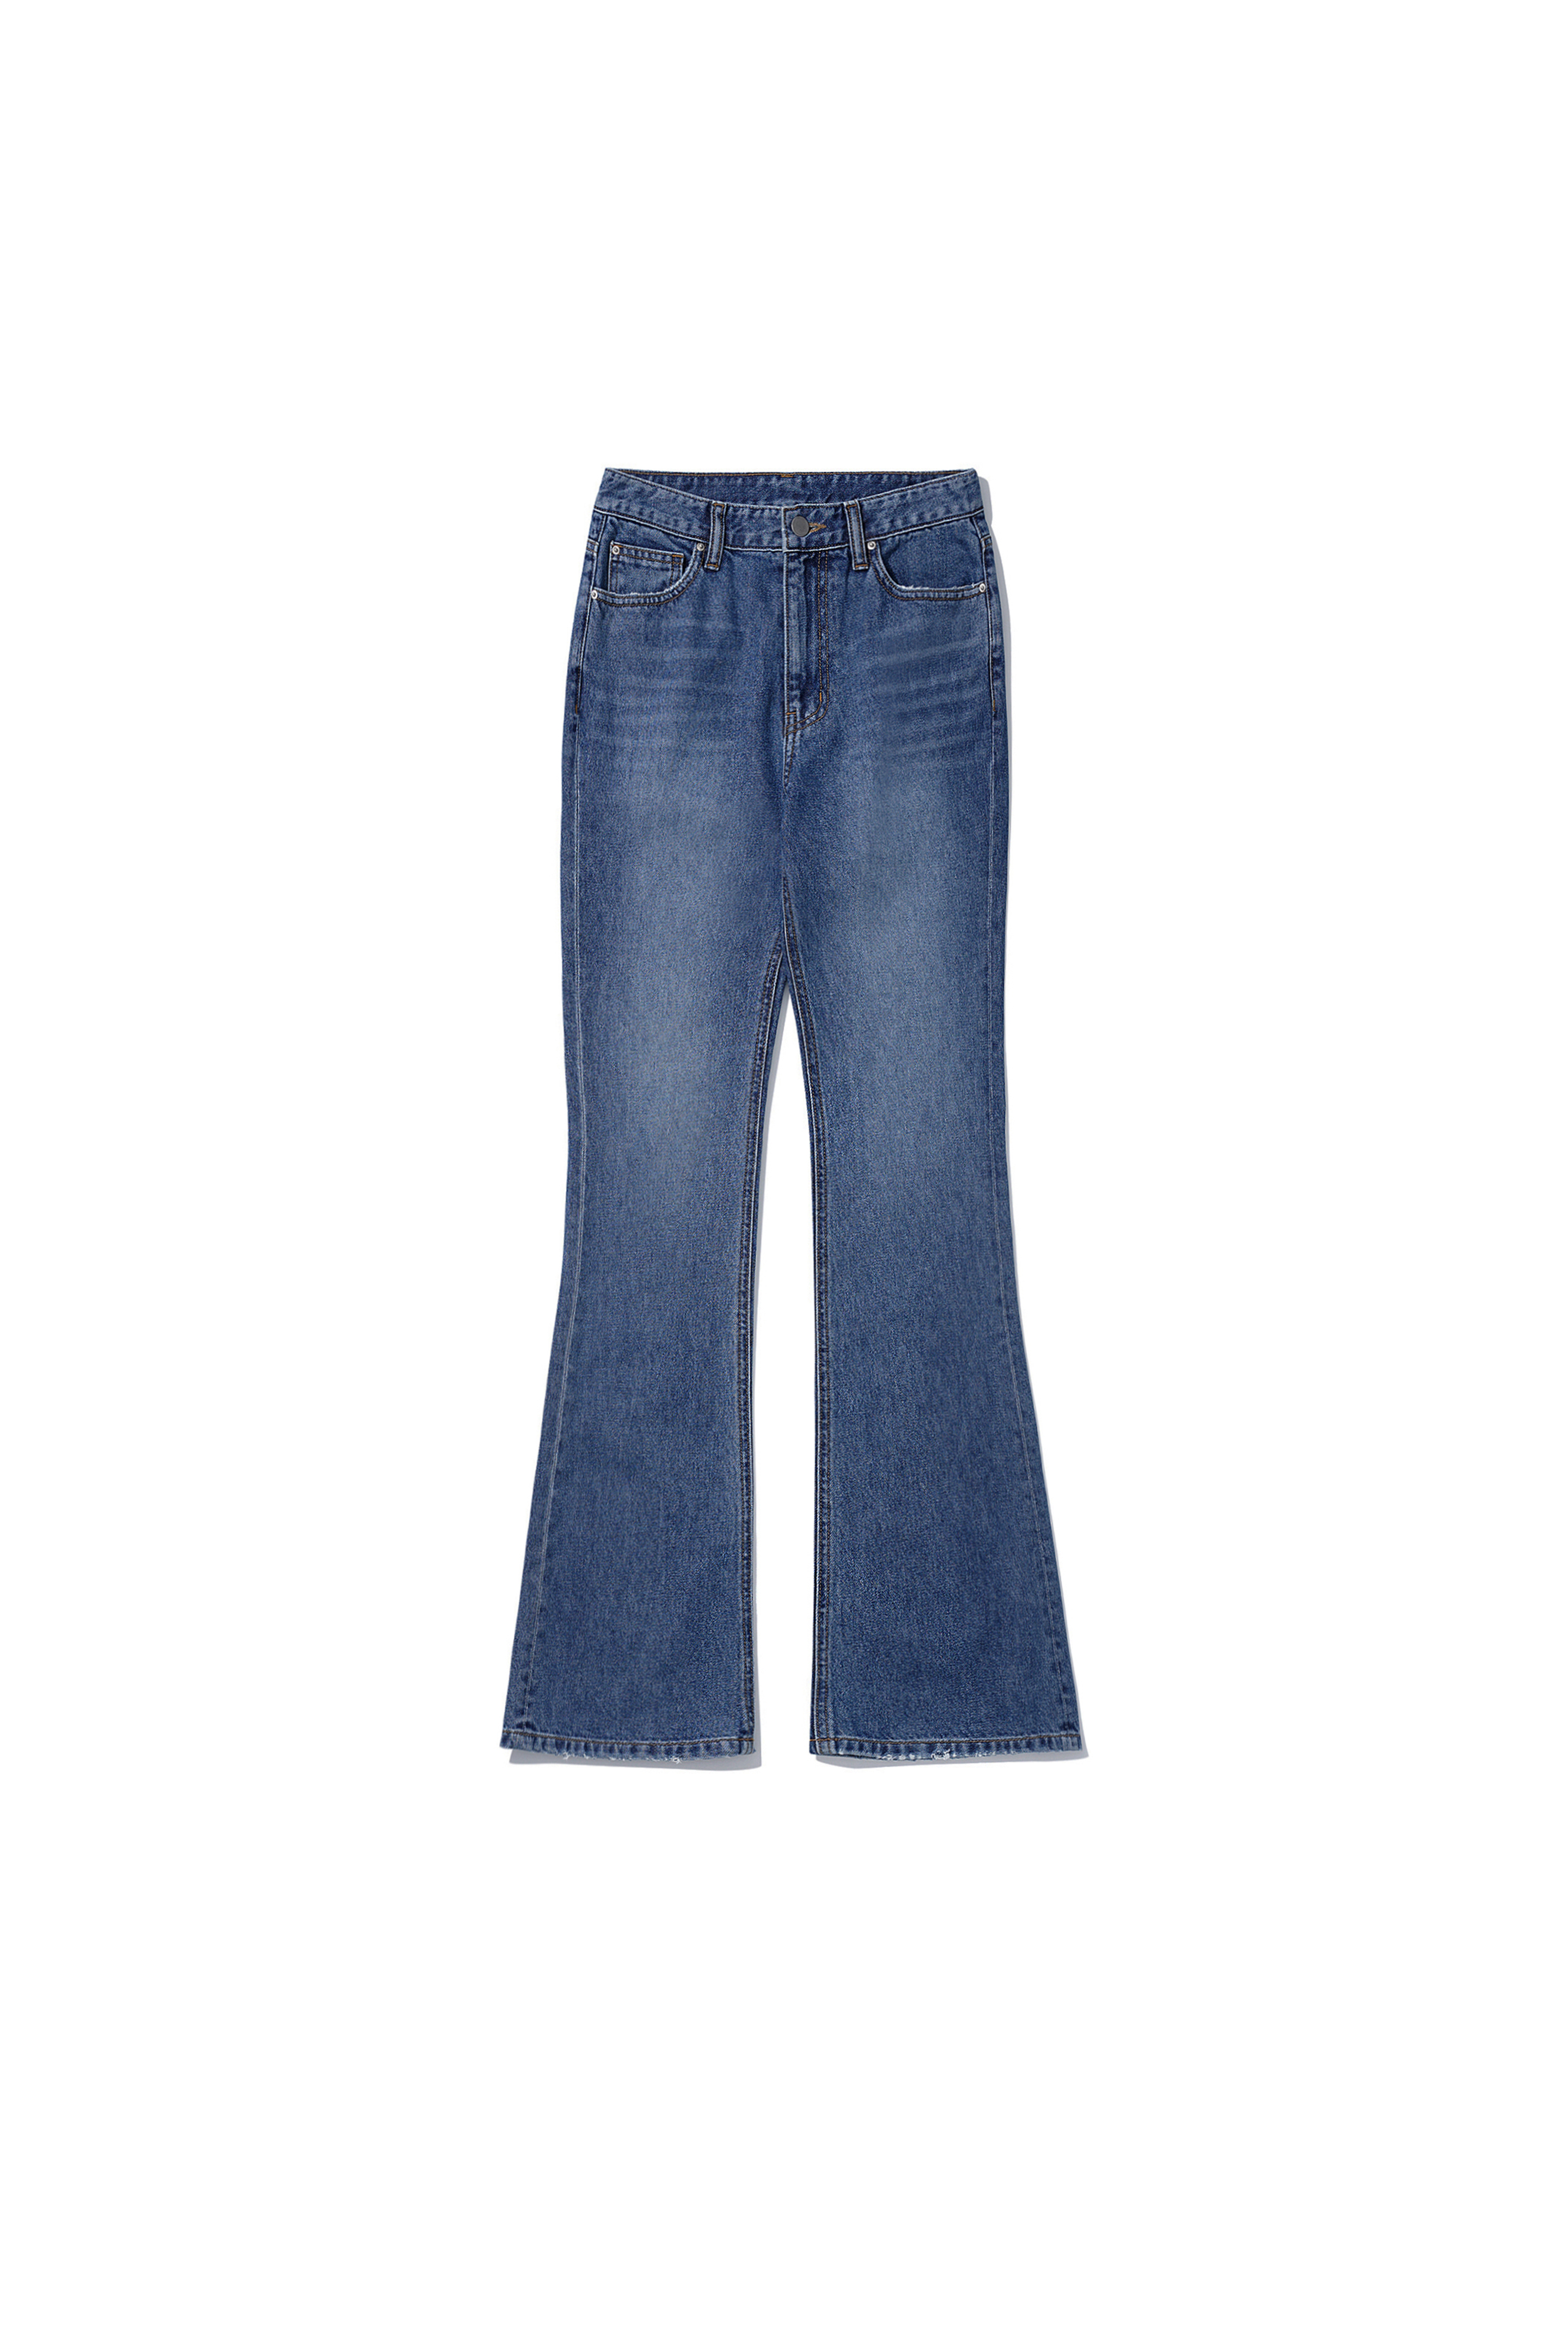 2nd) Jeans Trapez Fit M.Blue [04.03(WED) 예약 발송]